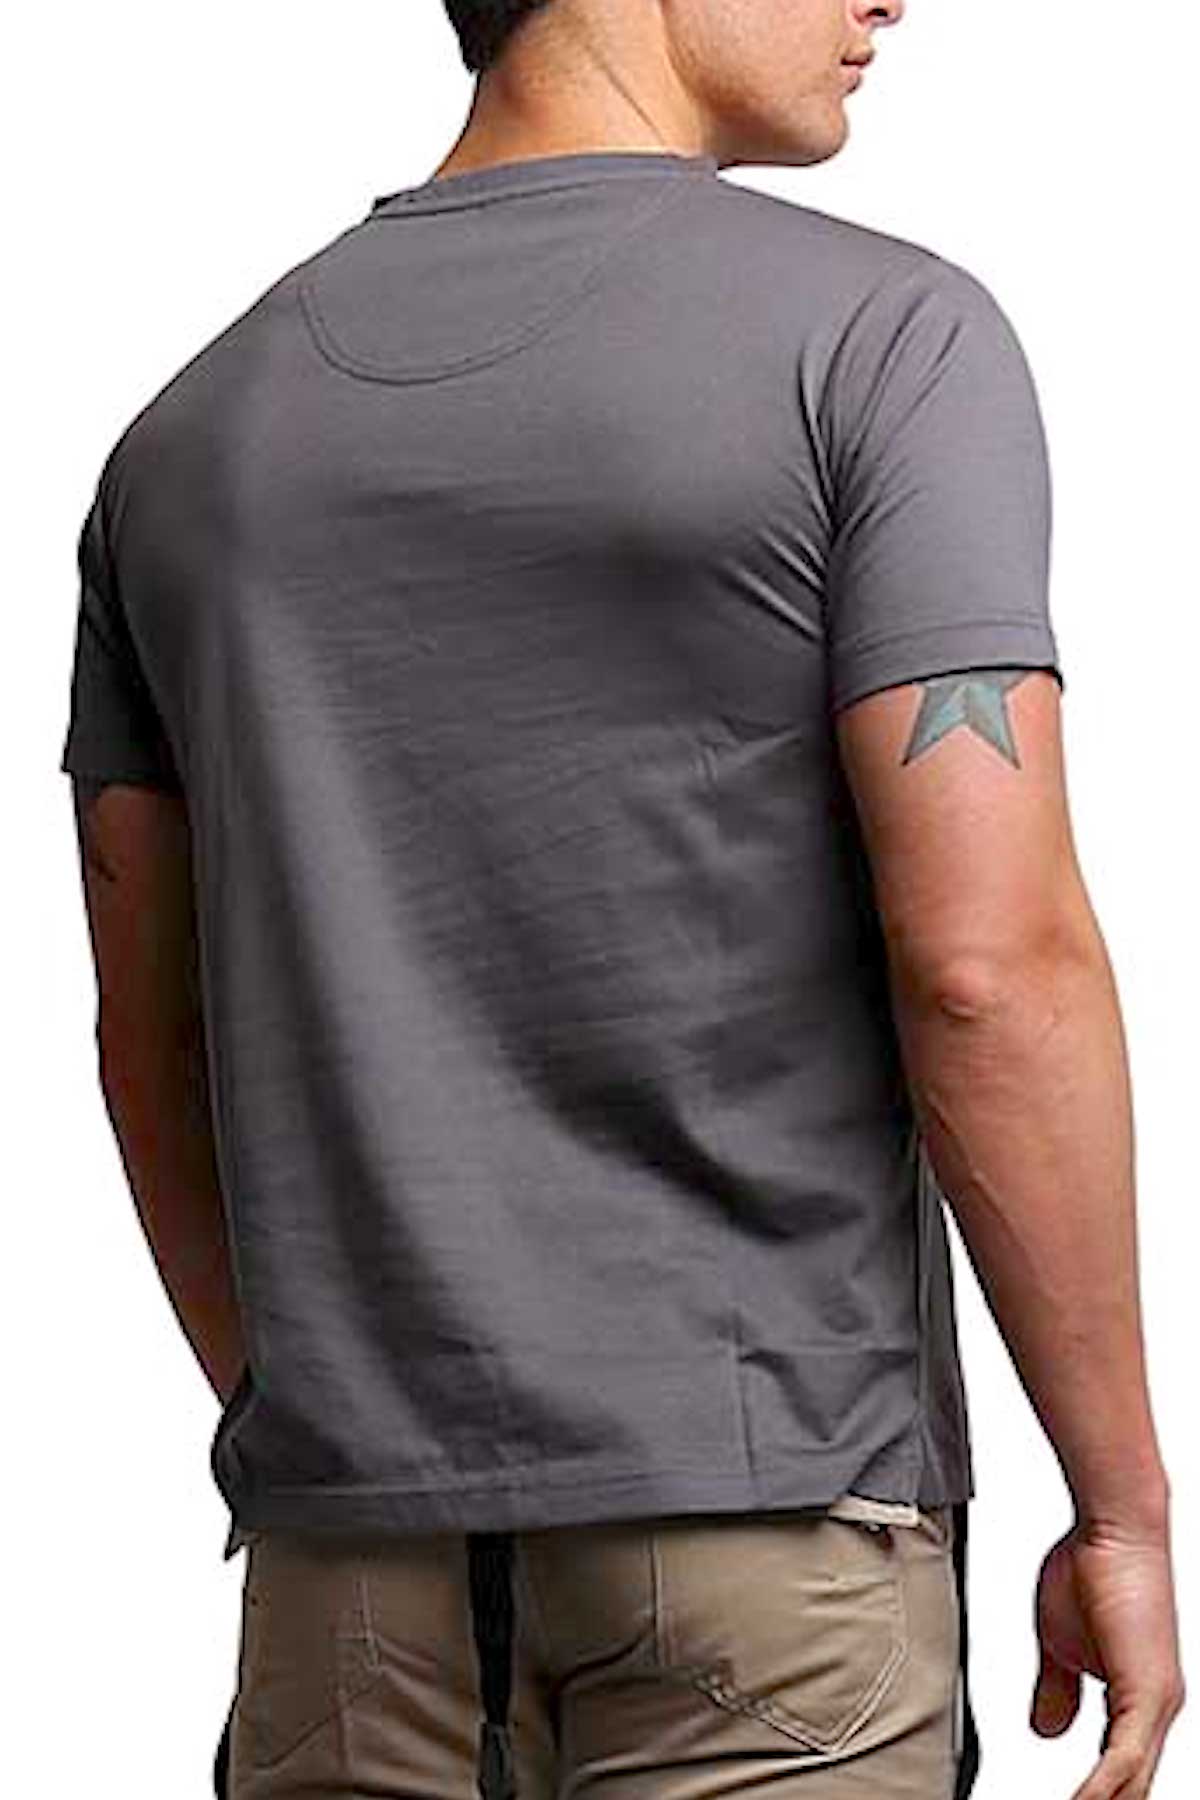 Something Strong Solid Grey Something Poisonous Pocket Tee